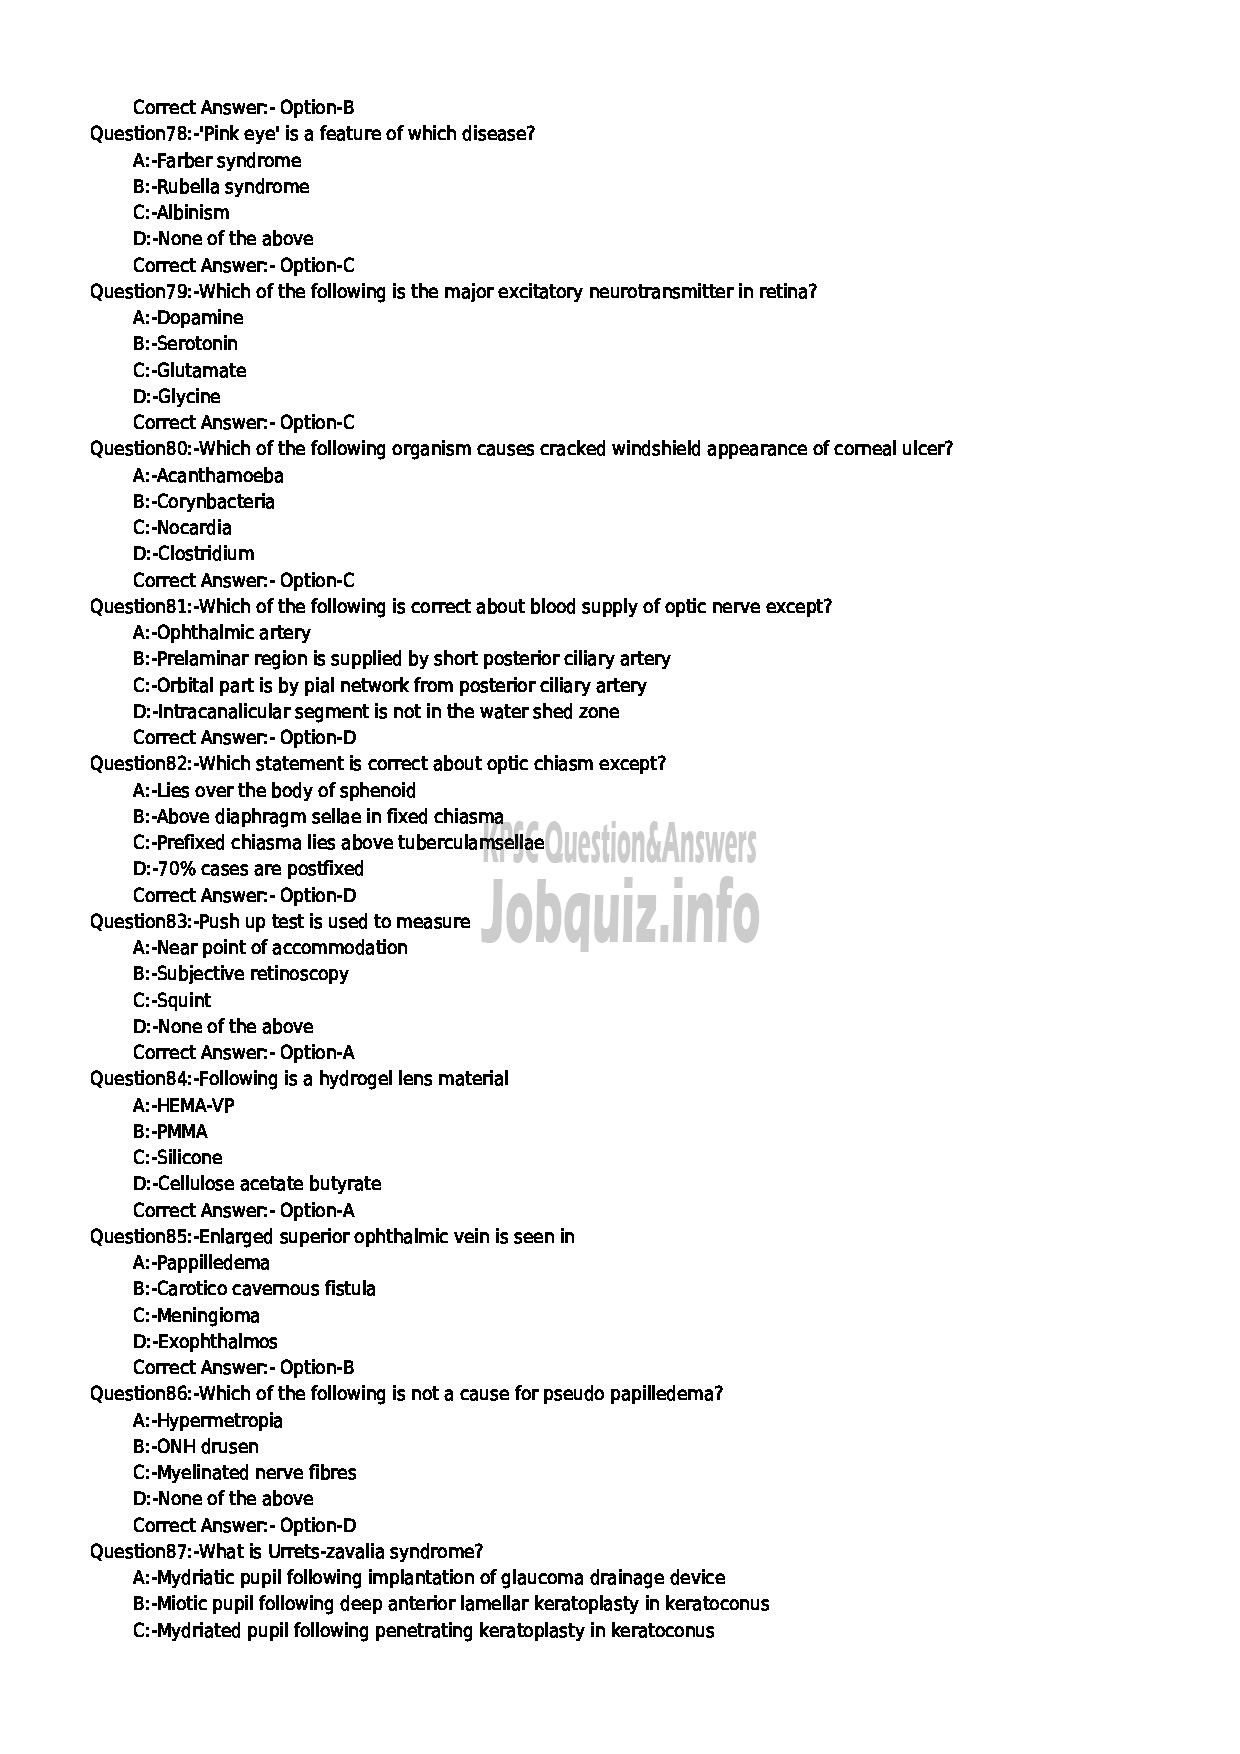 Kerala PSC Question Paper - SENIOR LECTURER IN OPTHALMOLOGY NCA MEDICAL EDUCATION-9